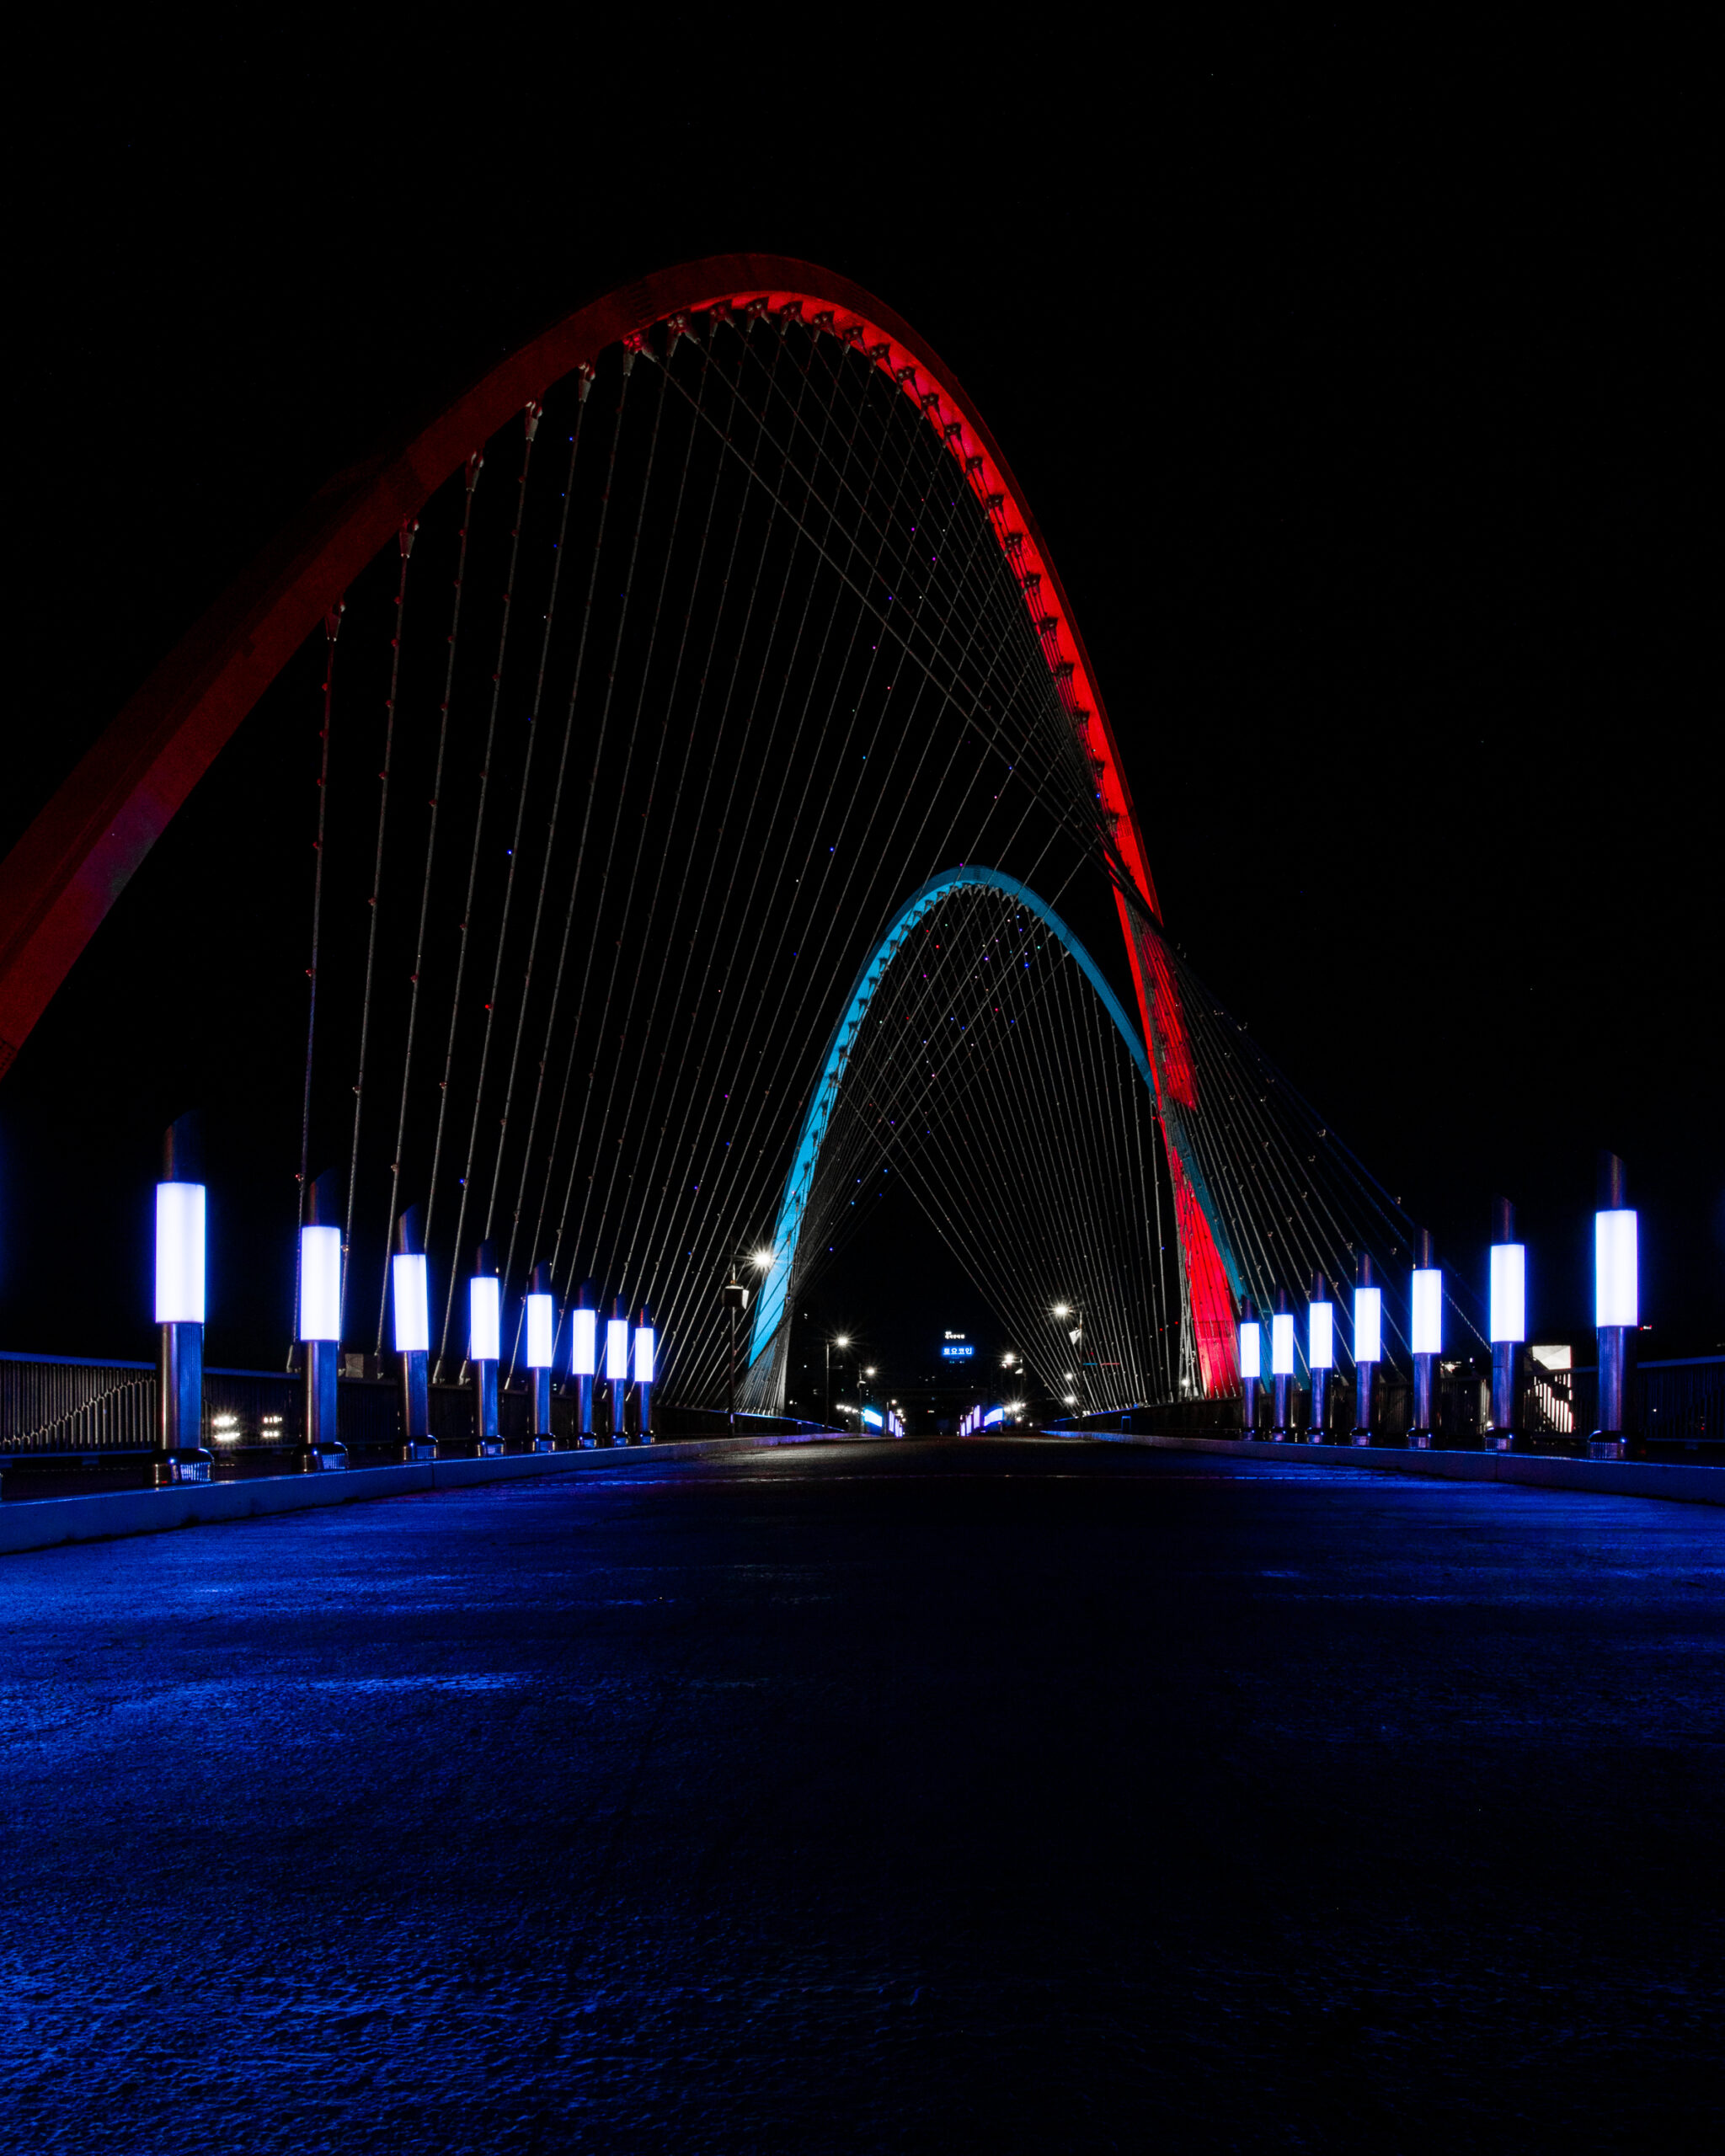 Wide Angle long exposure of Daejeon Expo Bridge with its Red and Blue modern cross braces lined by violet light pillar.